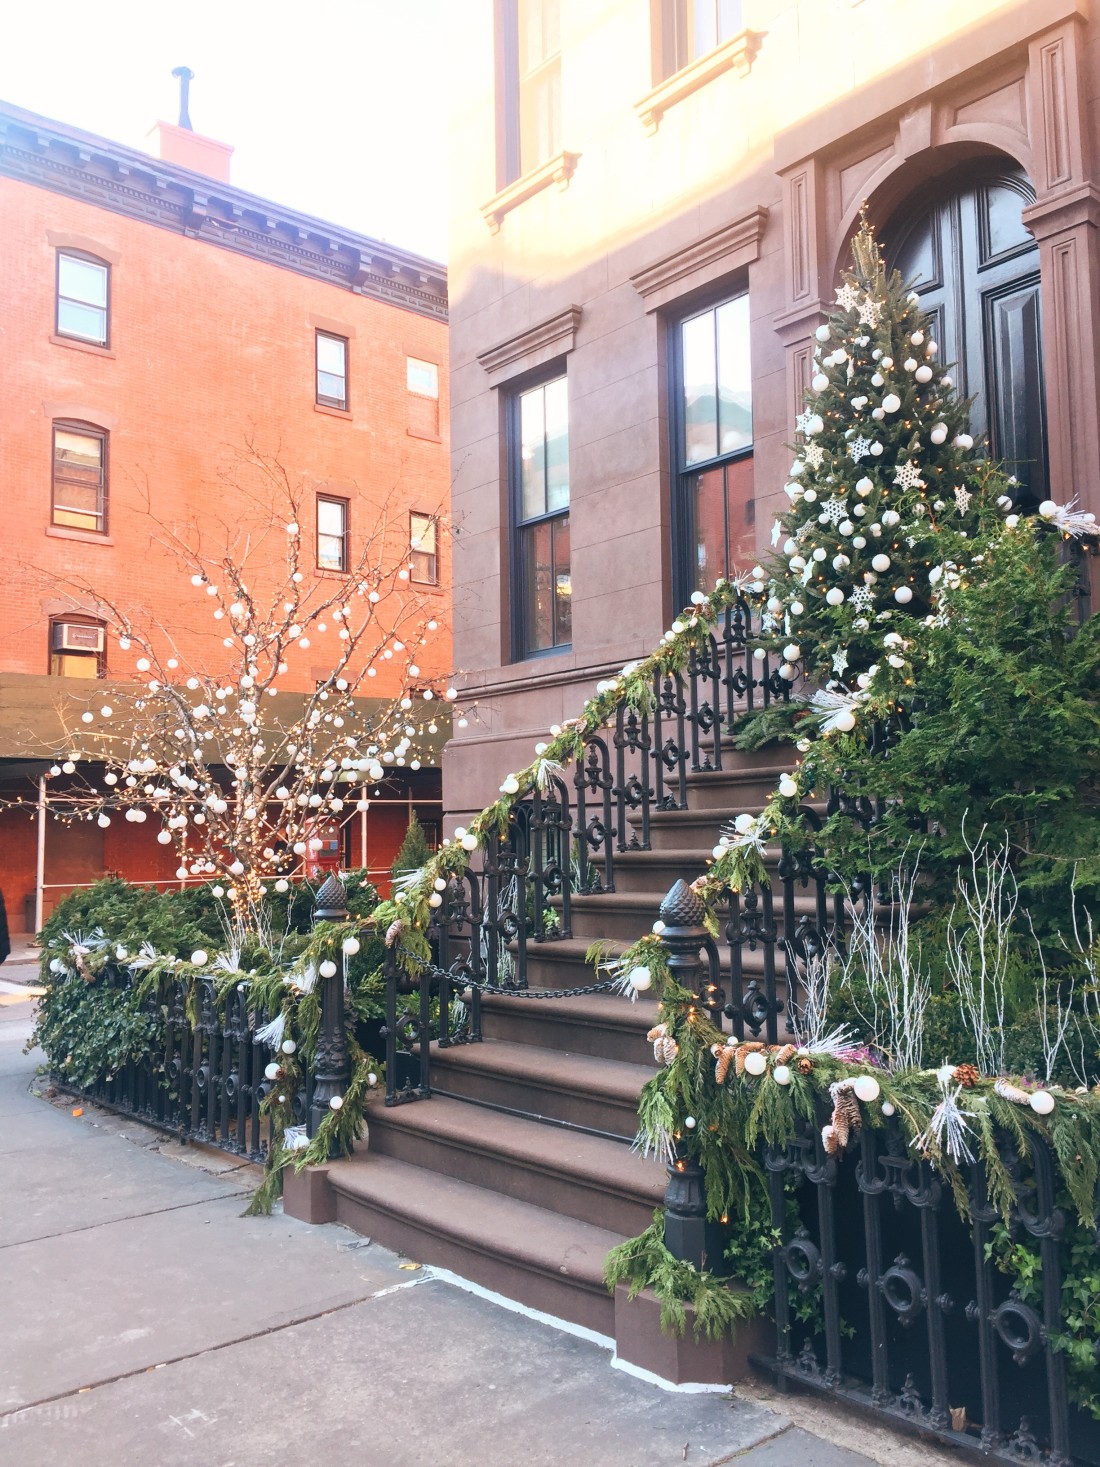 New-York-City-Holiday-Street-Chrimstas-On-Home-Town-Stoop-Holidays-In-New-YOrk